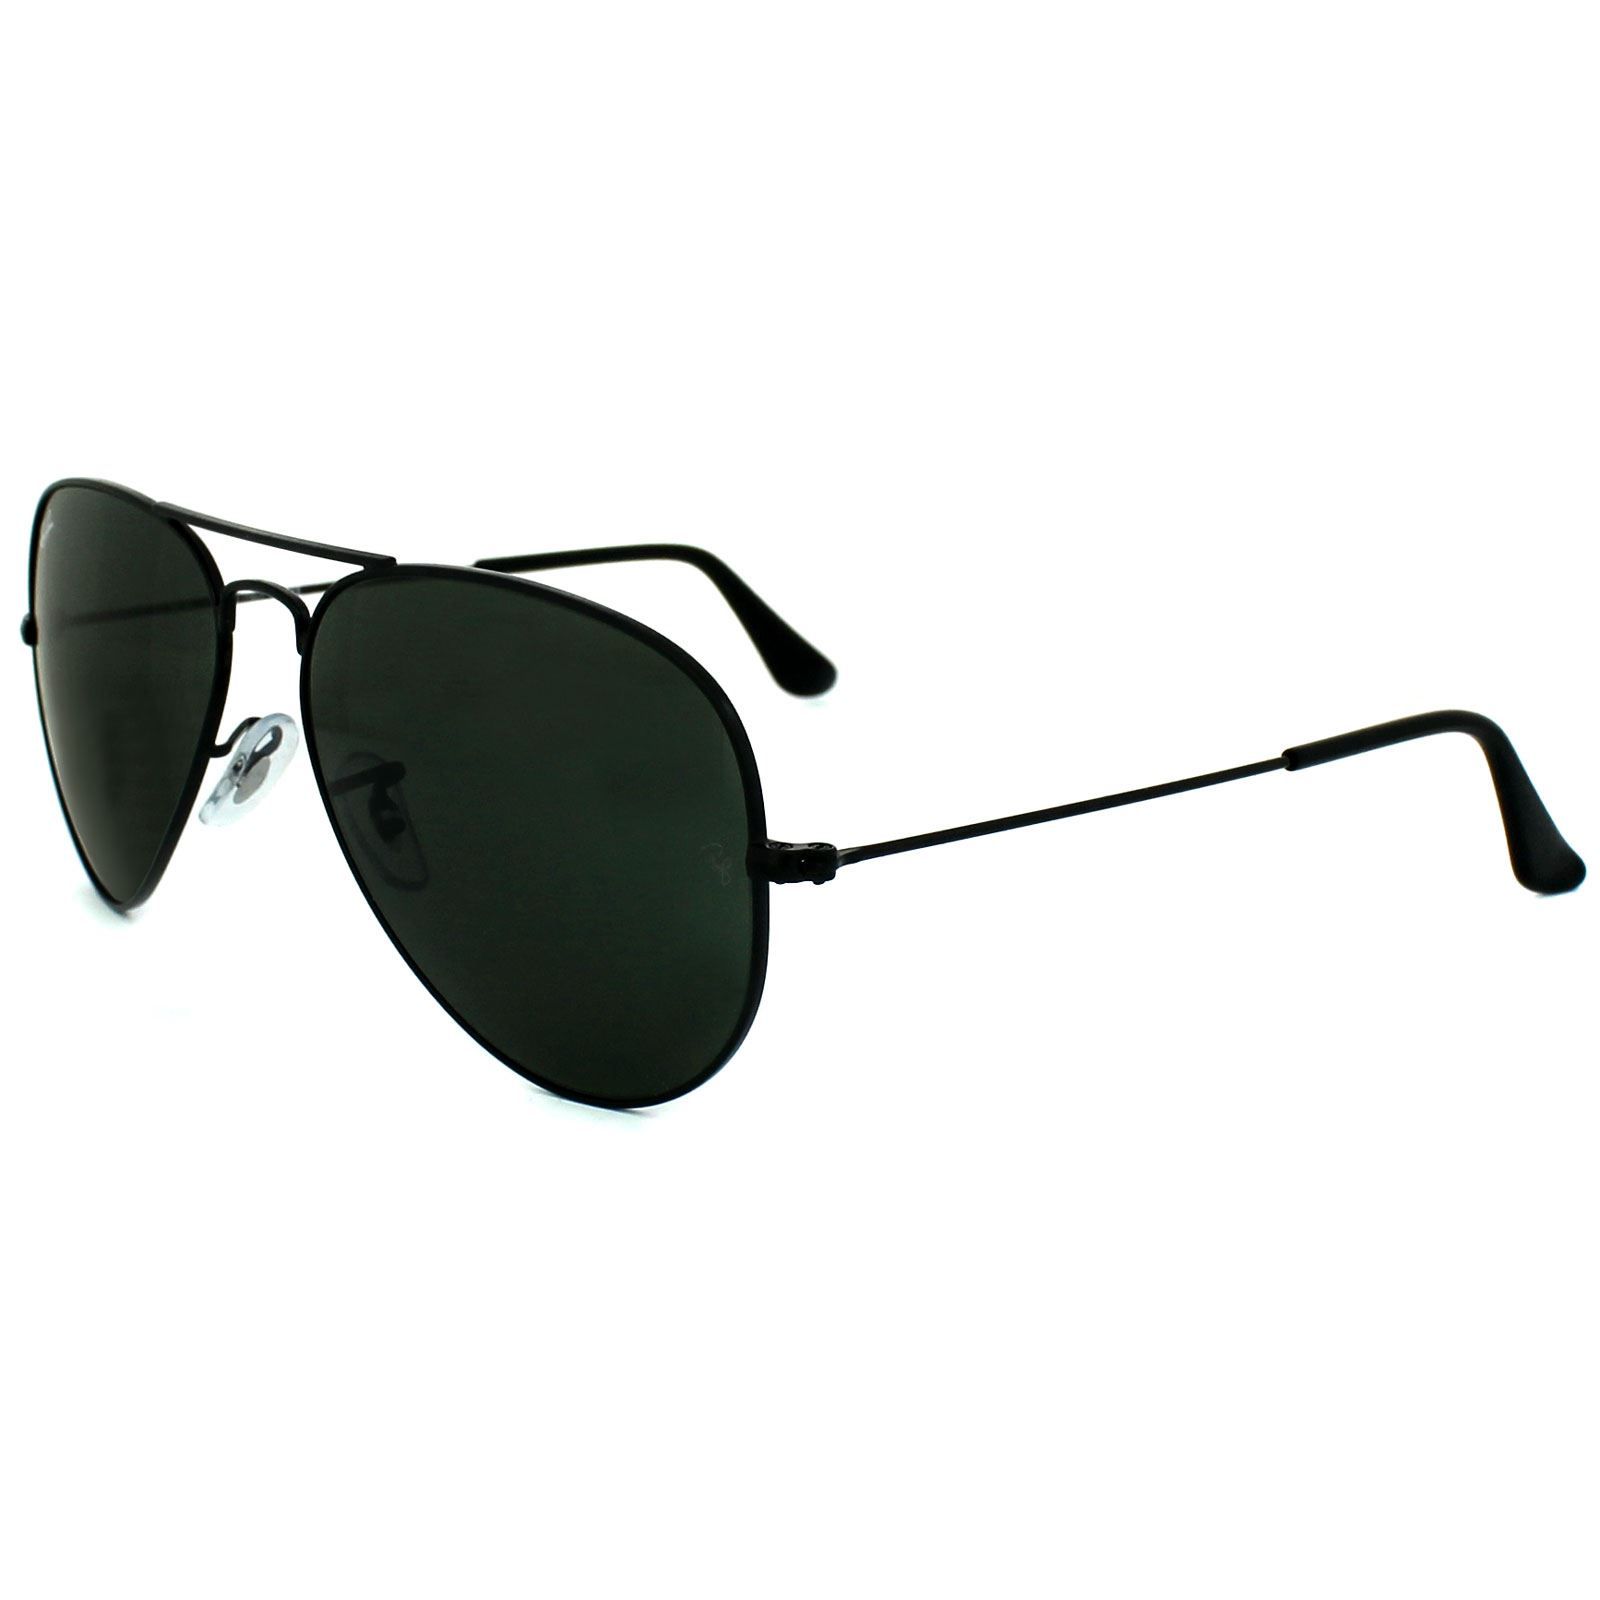 Ray-Ban Sunglasses Aviator 3025 L2823 Black Green were originally designed in 1936 for US military pilots and have since become one of the most iconic sunglasses models in the world. The timeless design is characterised by the thin metal wire frame, large teardrop shaped lenses and fine metal temples that feature silicone tips and nose pads for a customised and comfortable fit. This classic model is available in various sizes and an array of colourways.